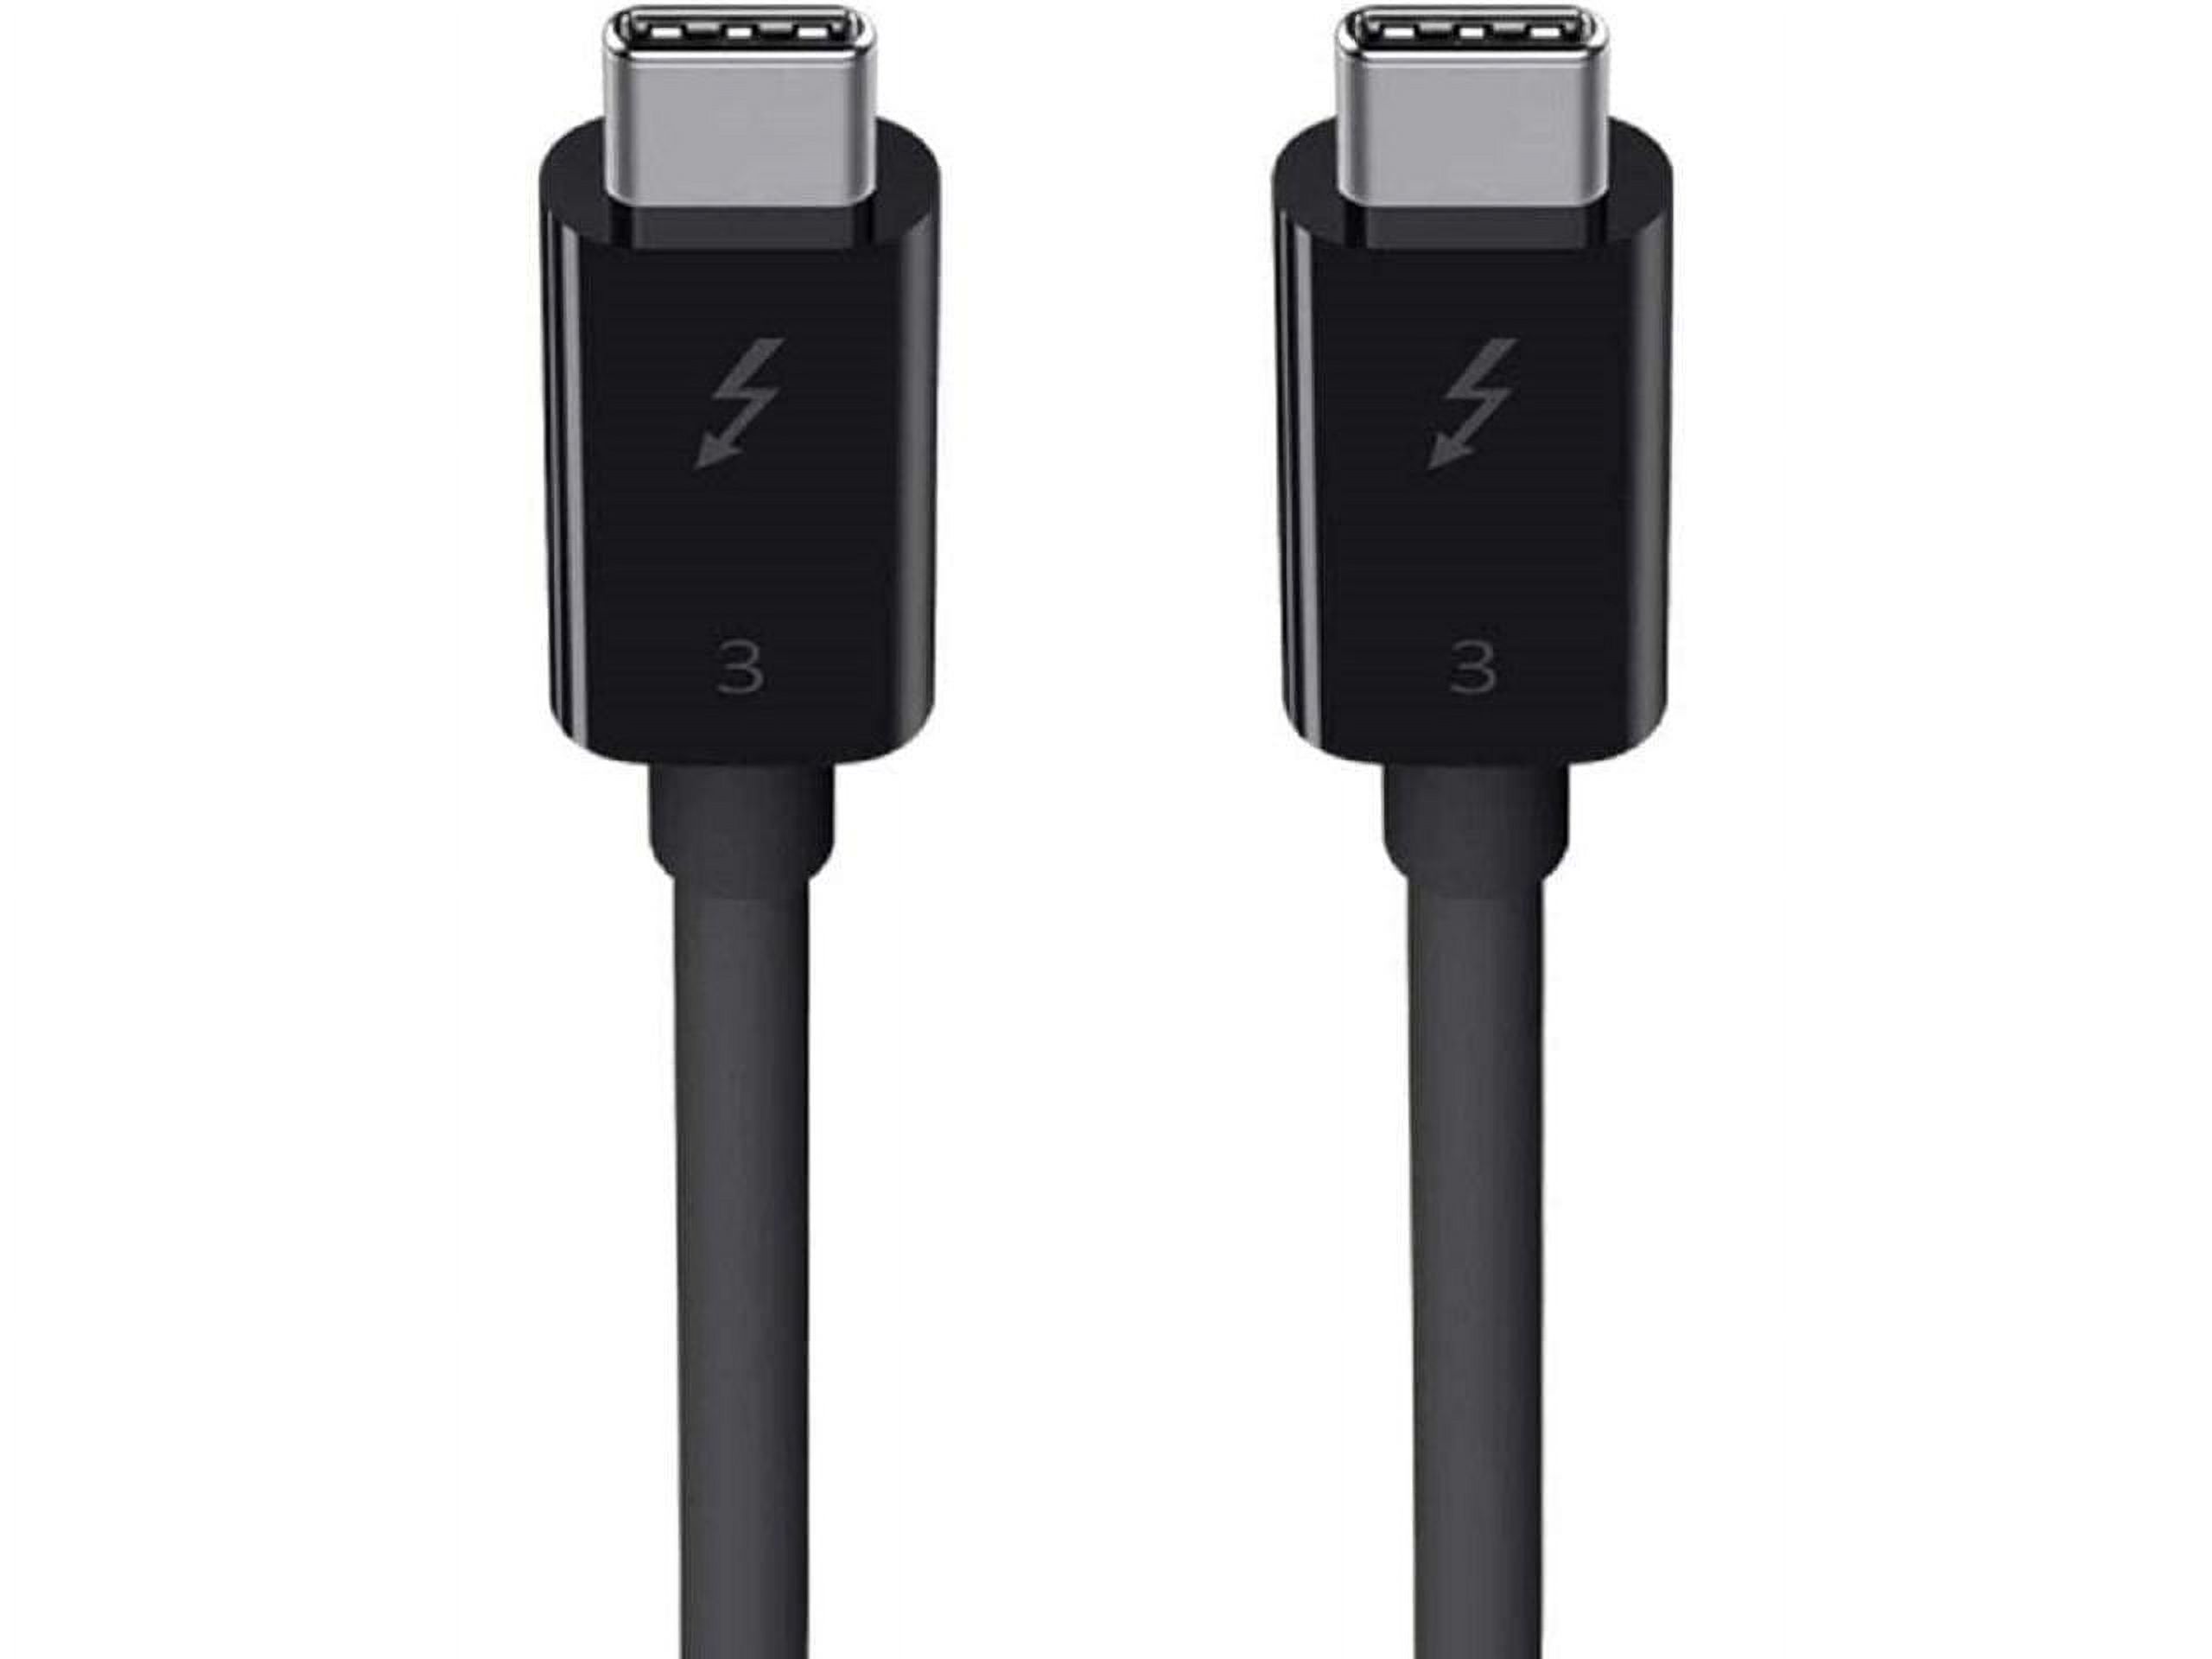 Belkin Thunderbolt 3 Cable, F2CD084 - image 4 of 12